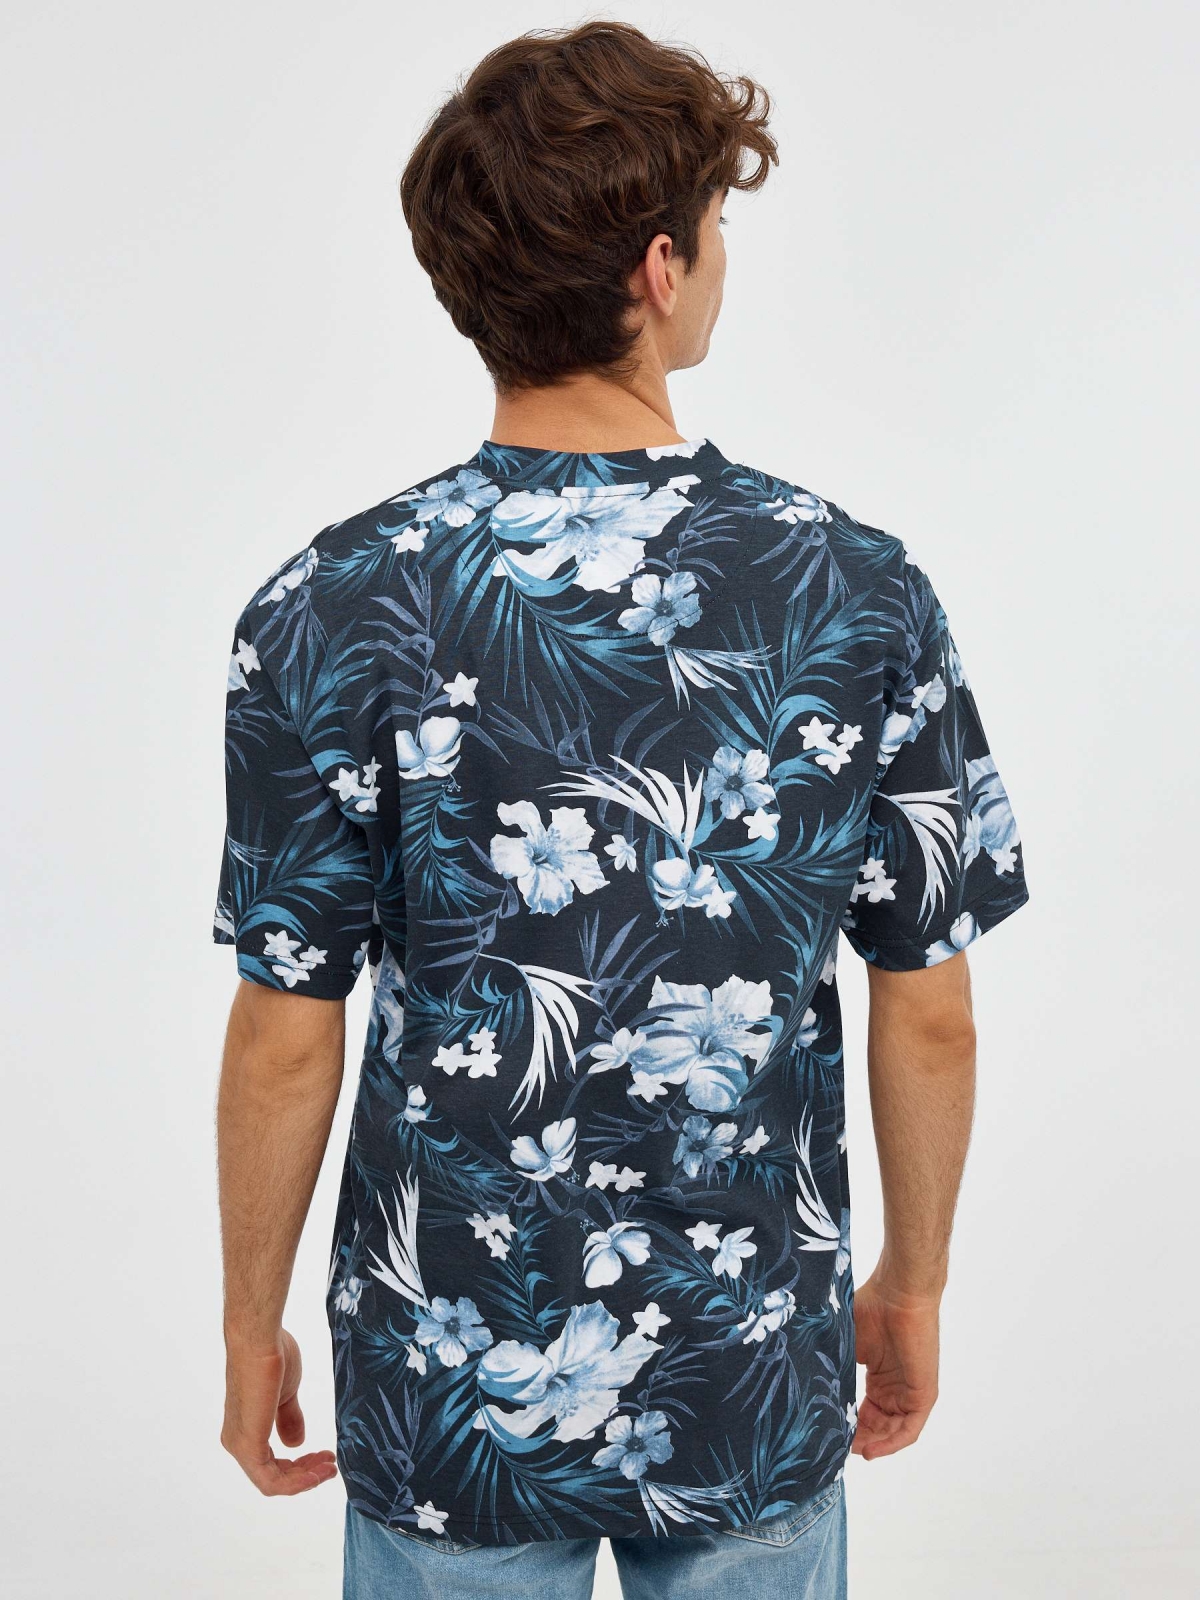 Tropical oversized t-shirt black middle back view